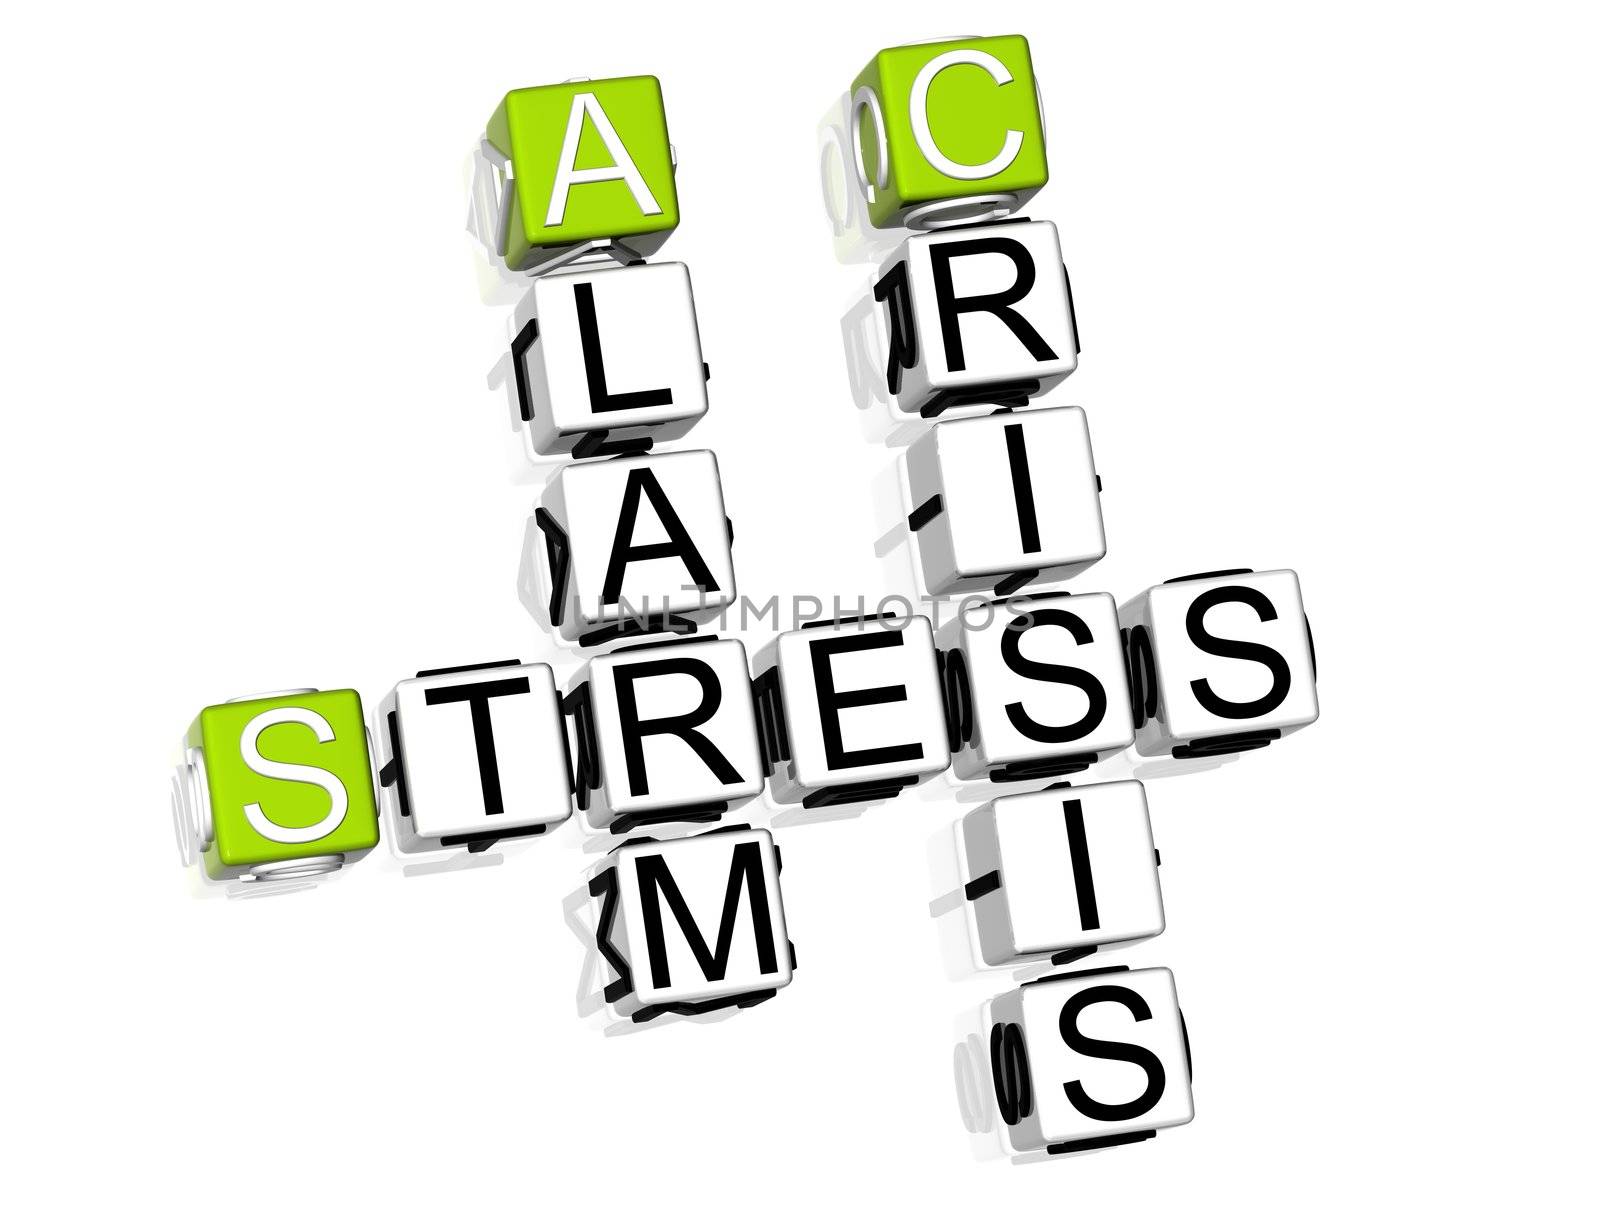 3D Stress Crossword text on white background